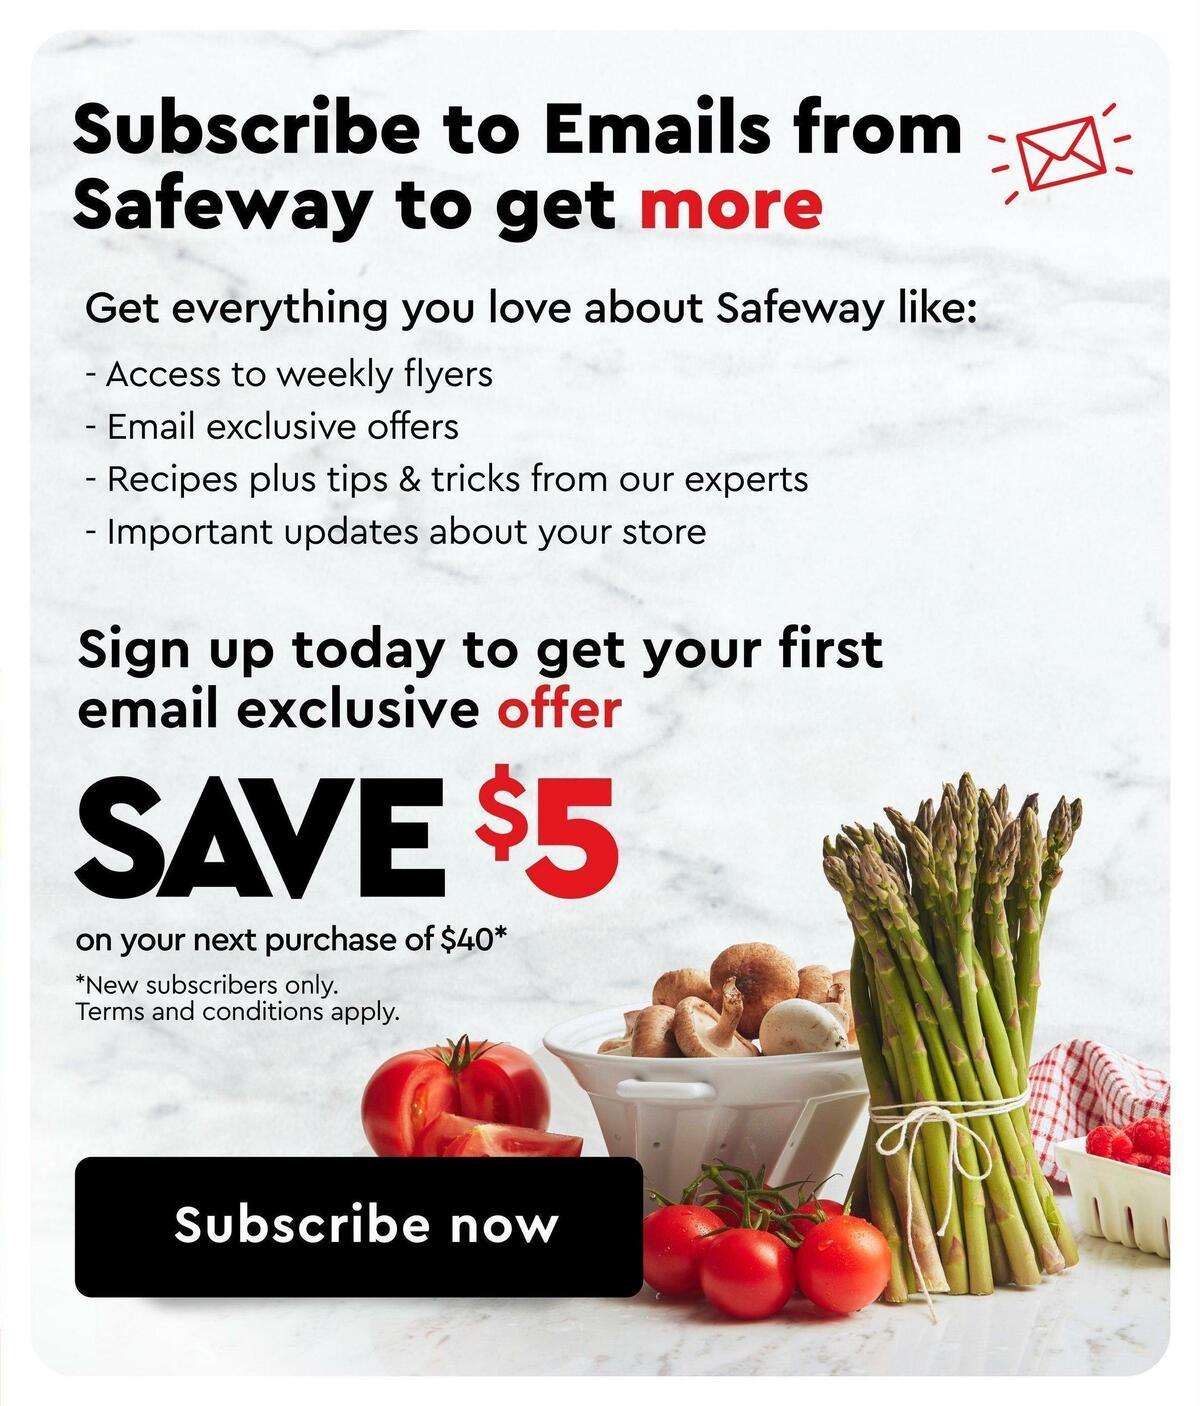 Safeway Flyer from January 19